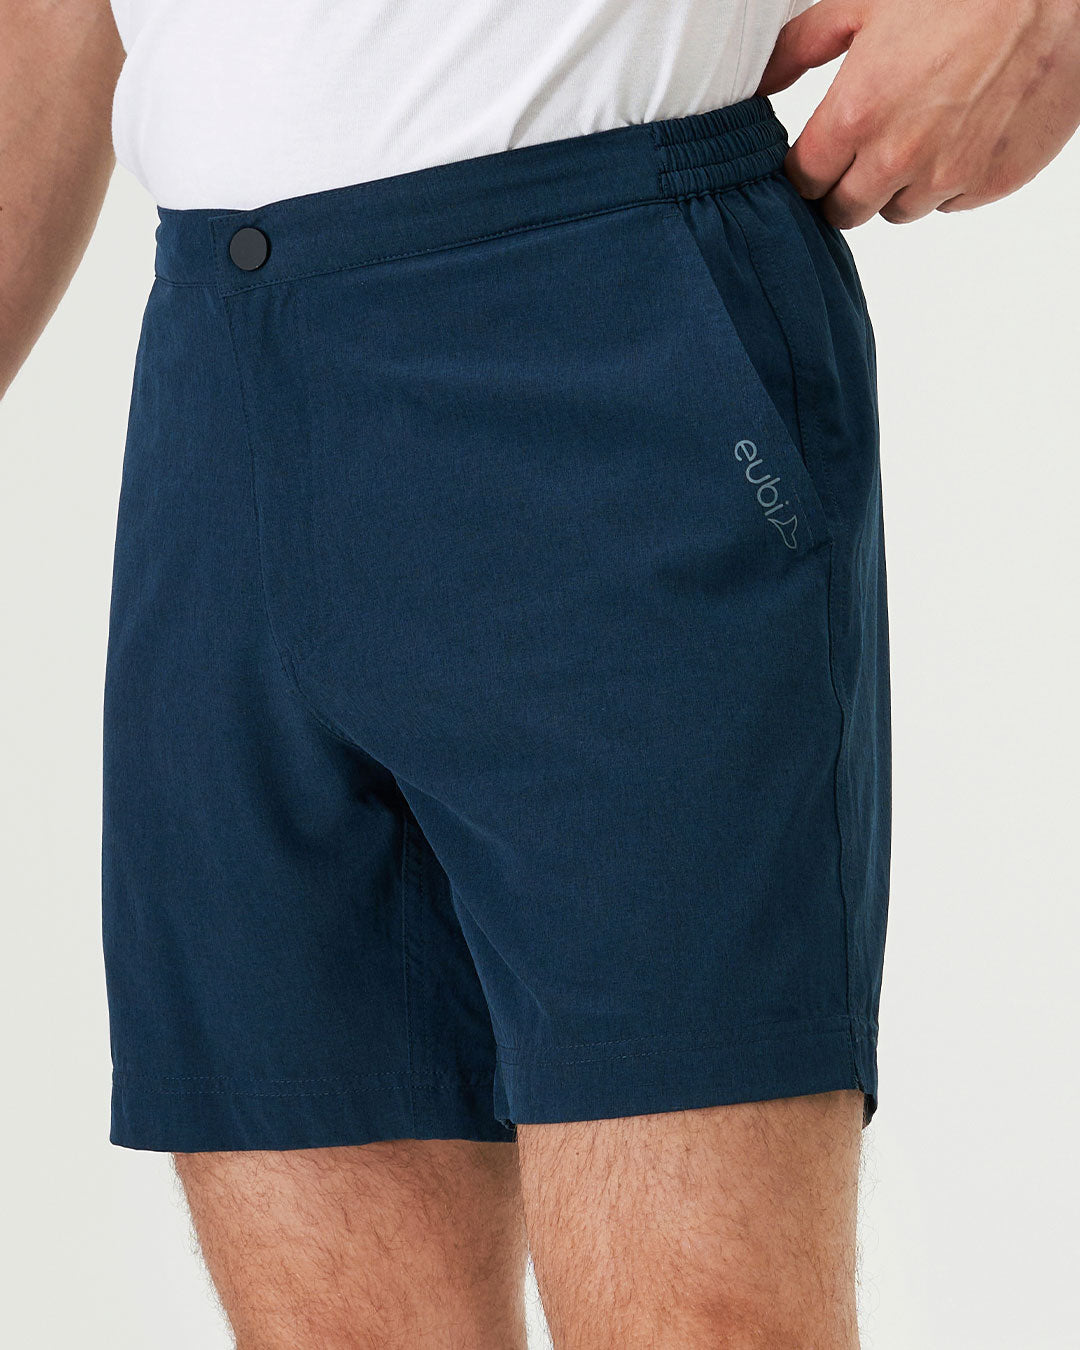 [Clearance] Packable Hybrid Shorts